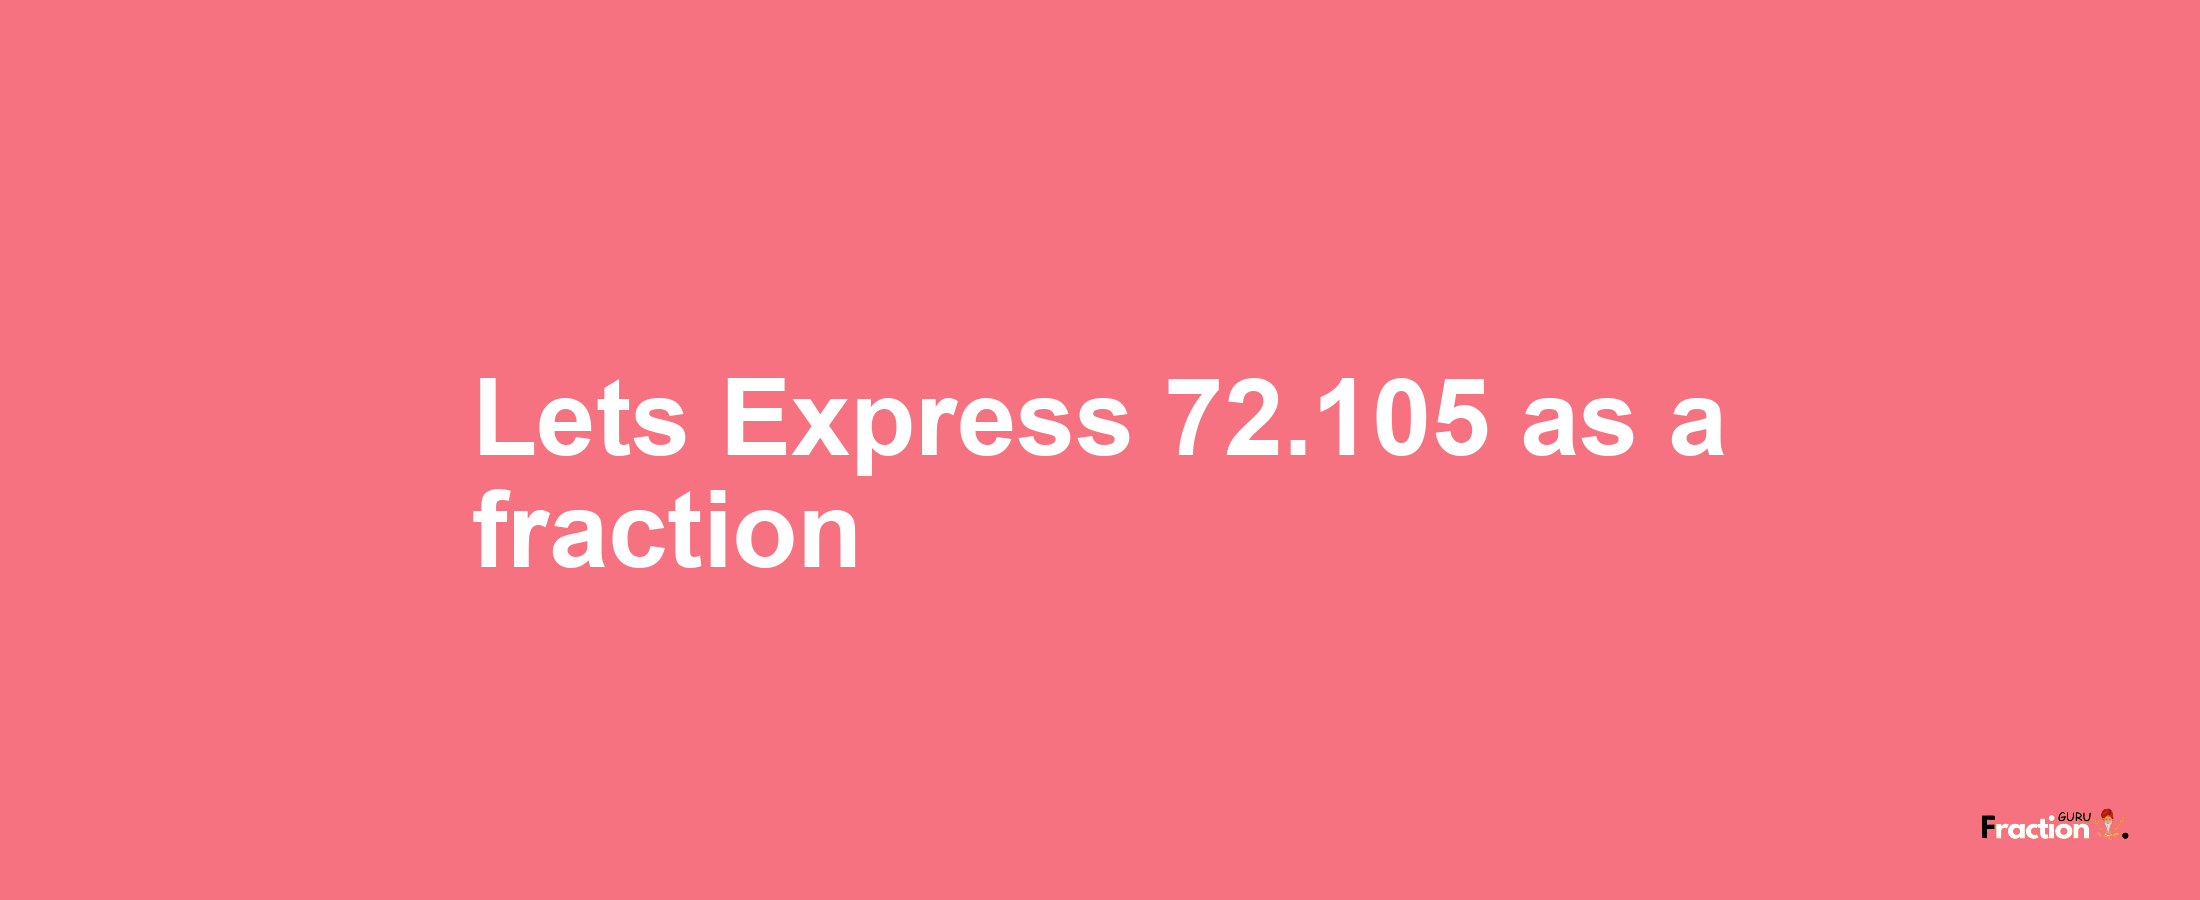 Lets Express 72.105 as afraction